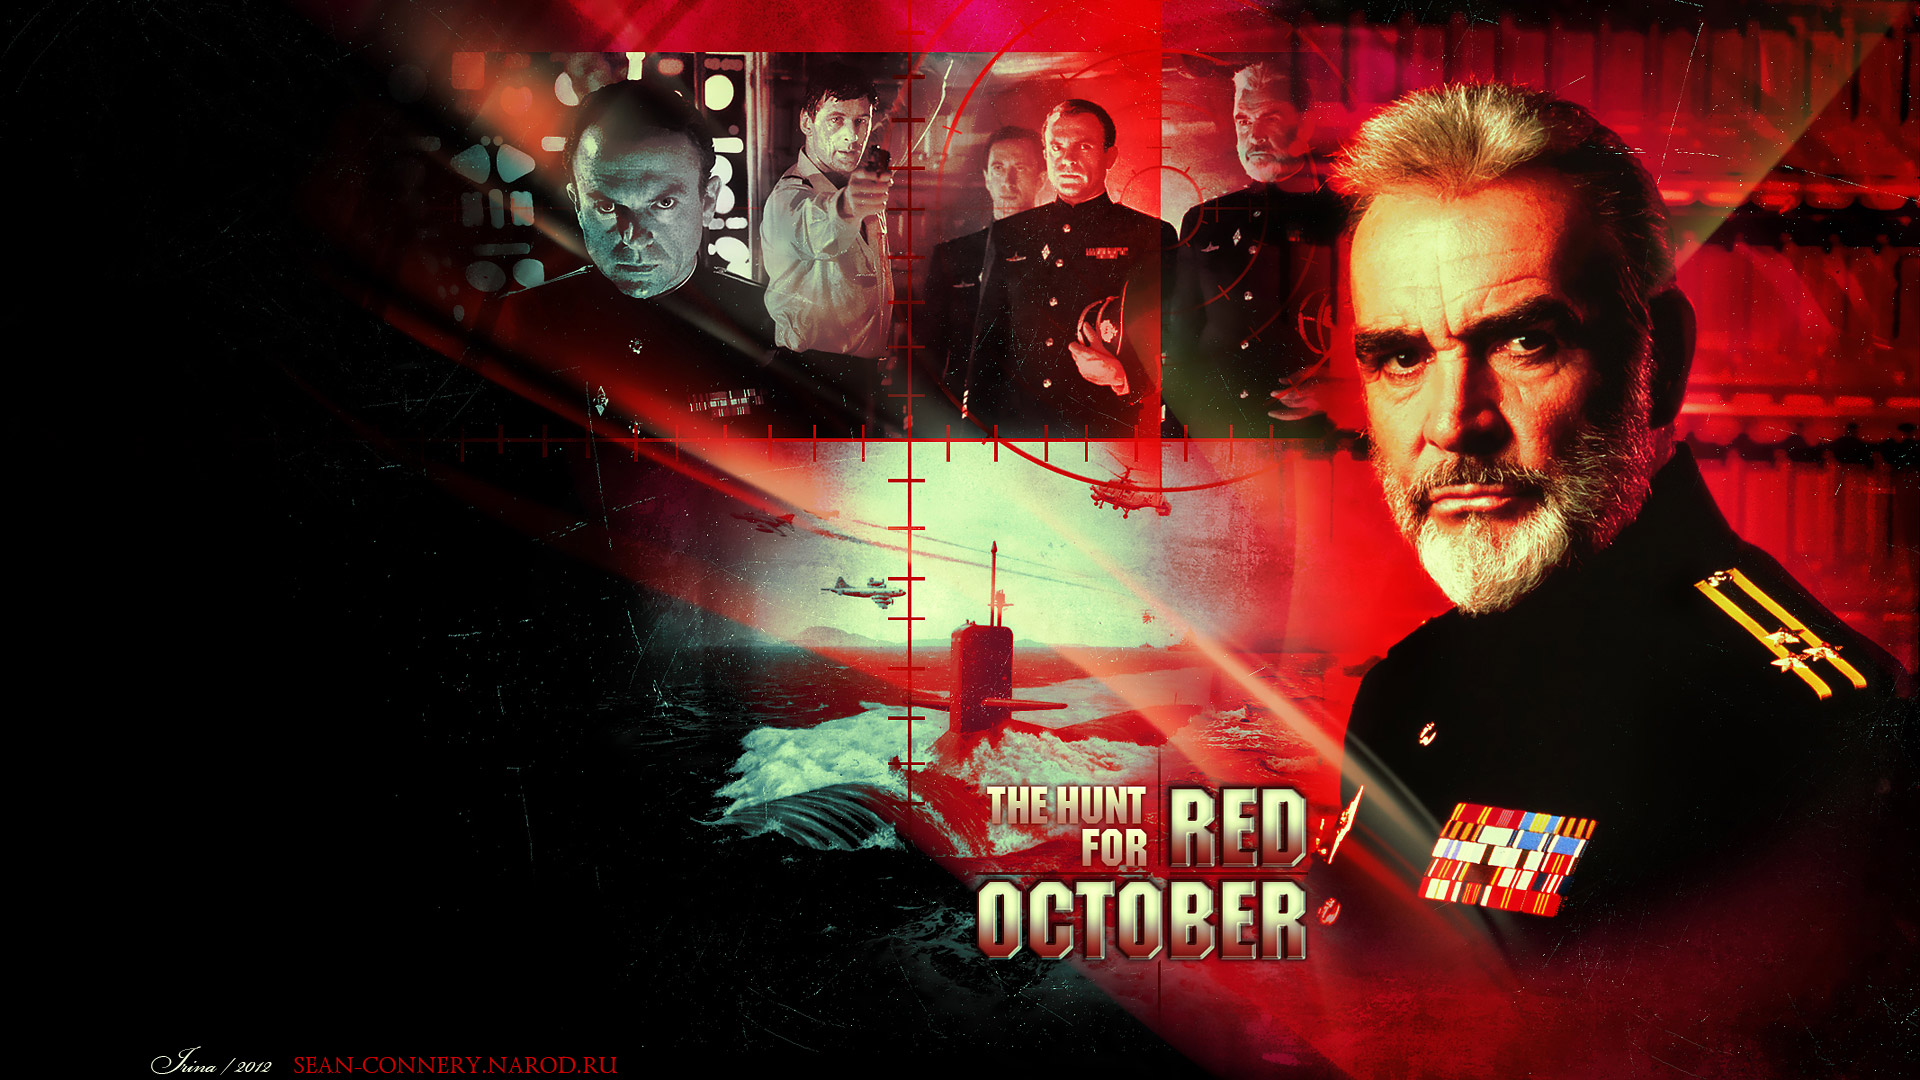   (Sean Connery)  Wallpapers.    . The Hunt for Red October.